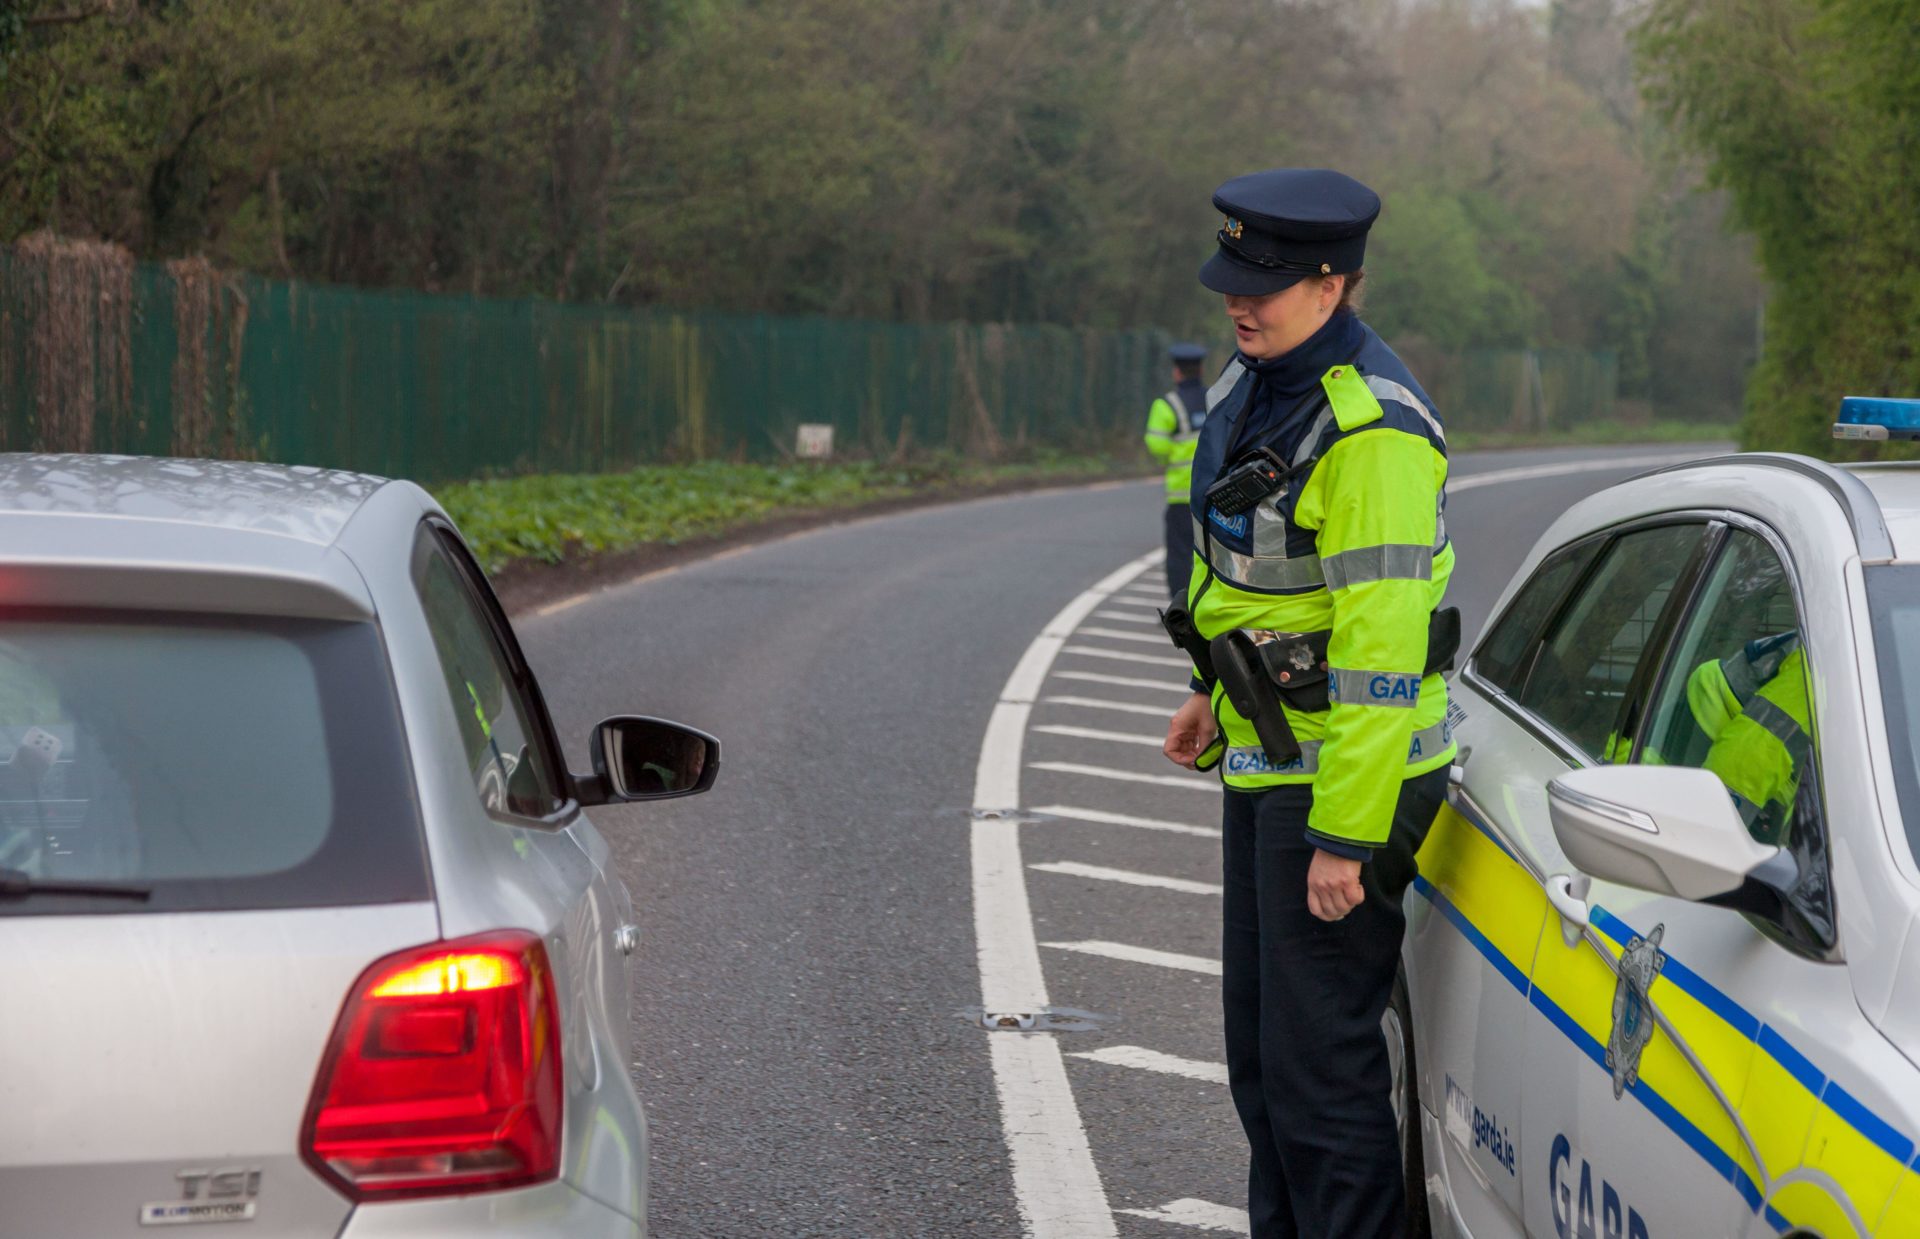 2BDWG65 Carrigaline, Cork, Ireland. 10th April, 2020. Garda Jacinta Broderick, speaking with drivers on their reasons for travel at a checkpoint outside Carrigaline, Co. Cork. In order to minimise the spread of Covid-19 the Gardai have set up more than 600 checkpoints nationwide to persuade the public not to travel outside the 2km restriction zone from their homes. - Credit; David Creedon / Alamy Live News